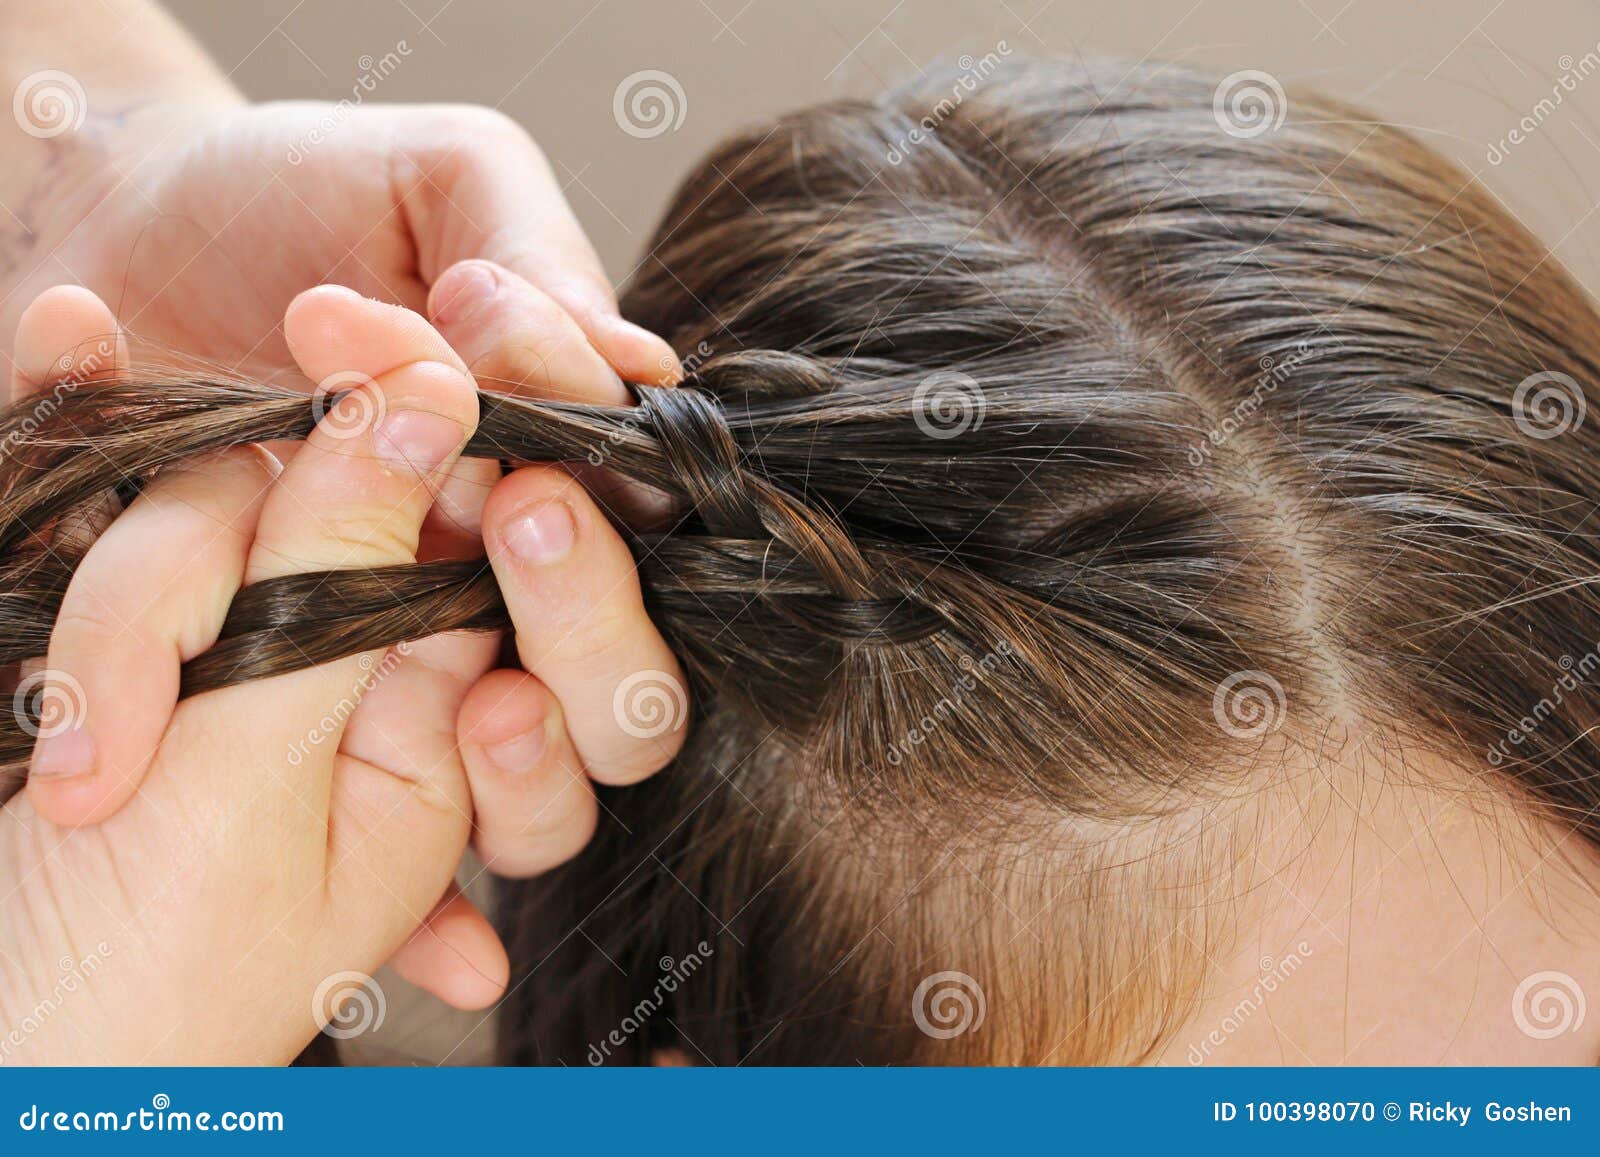 Hairstyle Braids Stock Photo Image Of Fashion Brown